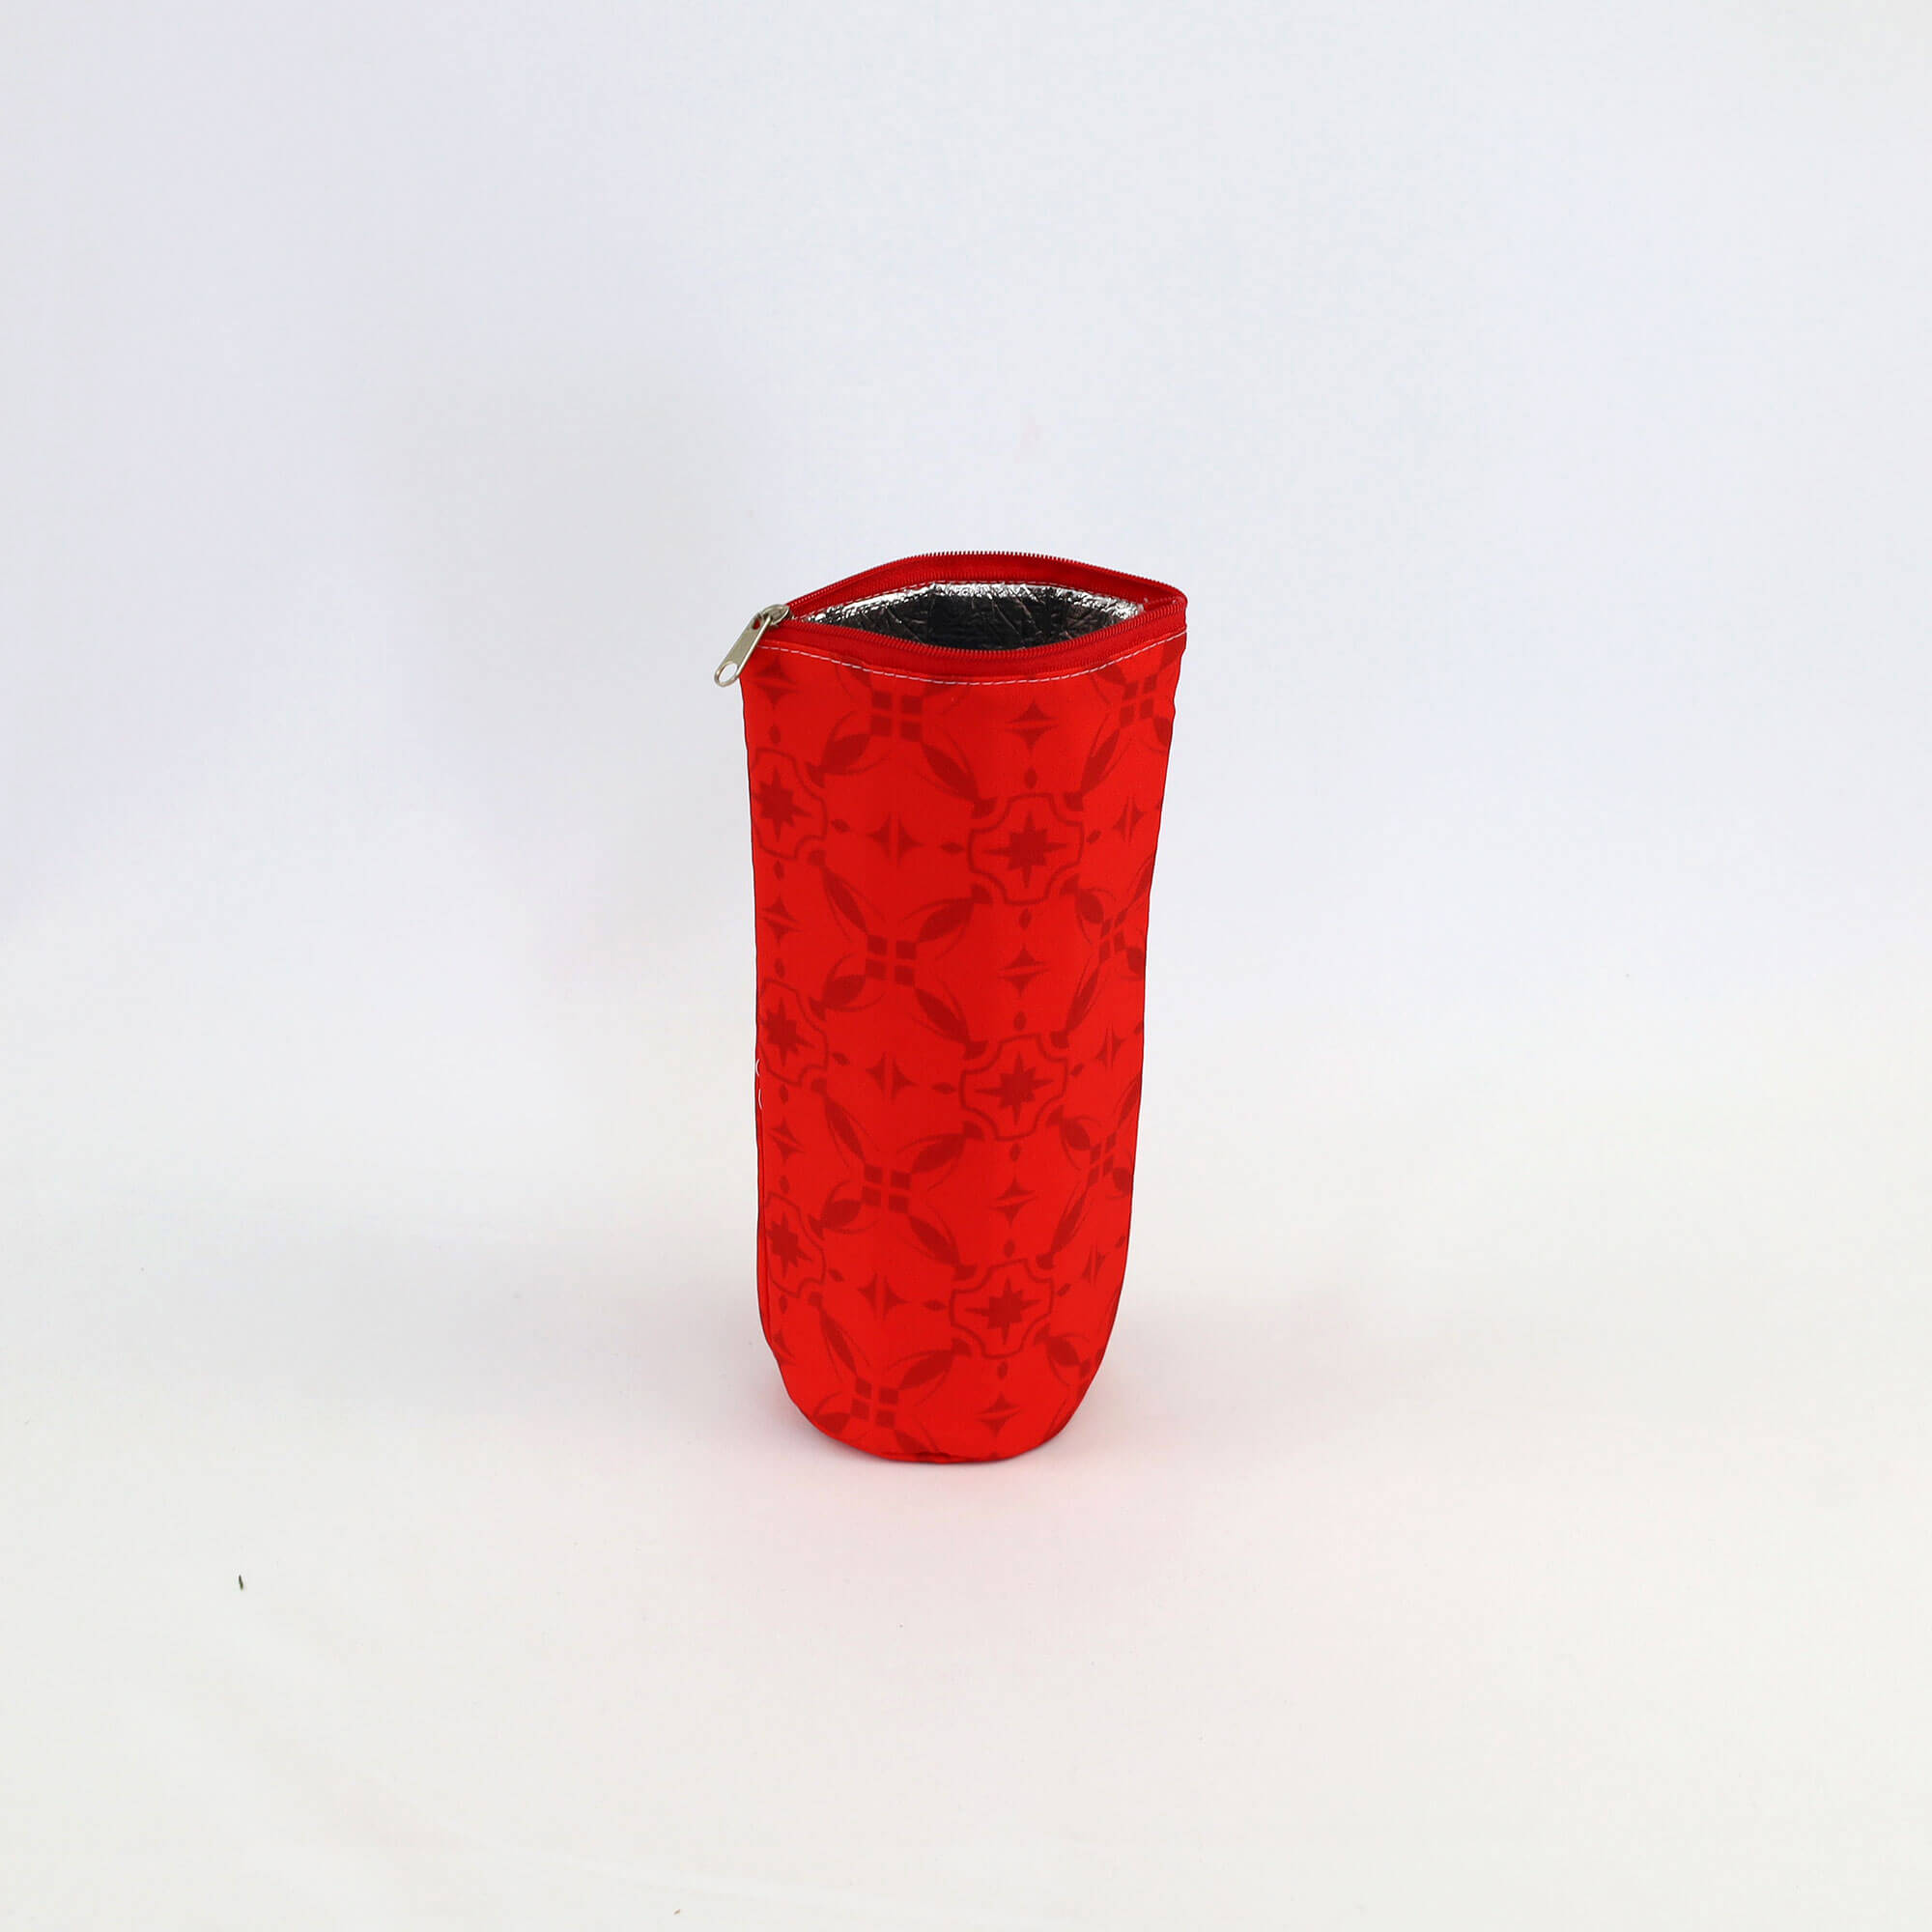 Small thermal bag for total imp/polyester bottle